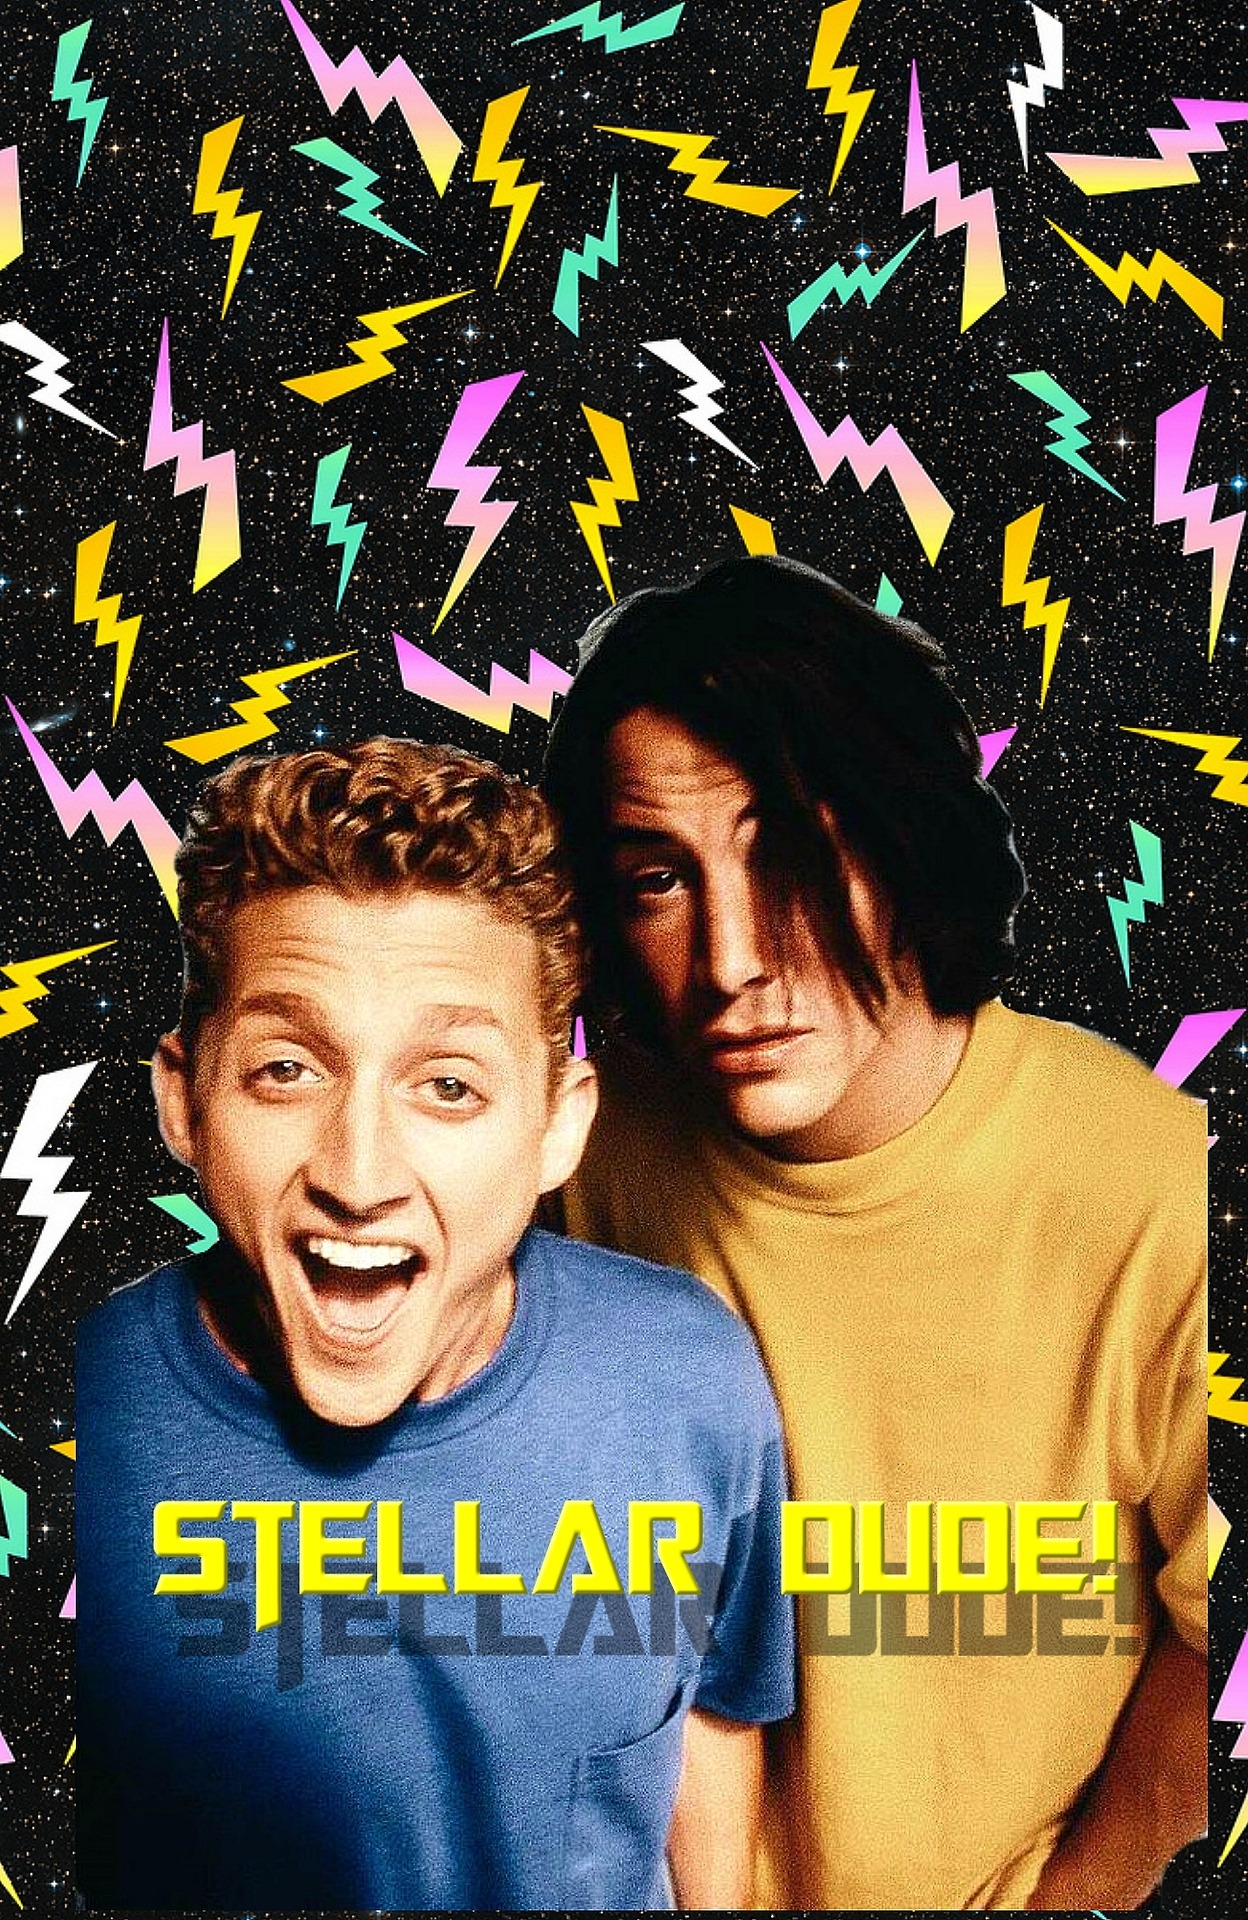 Bill And Ted Wallpapers